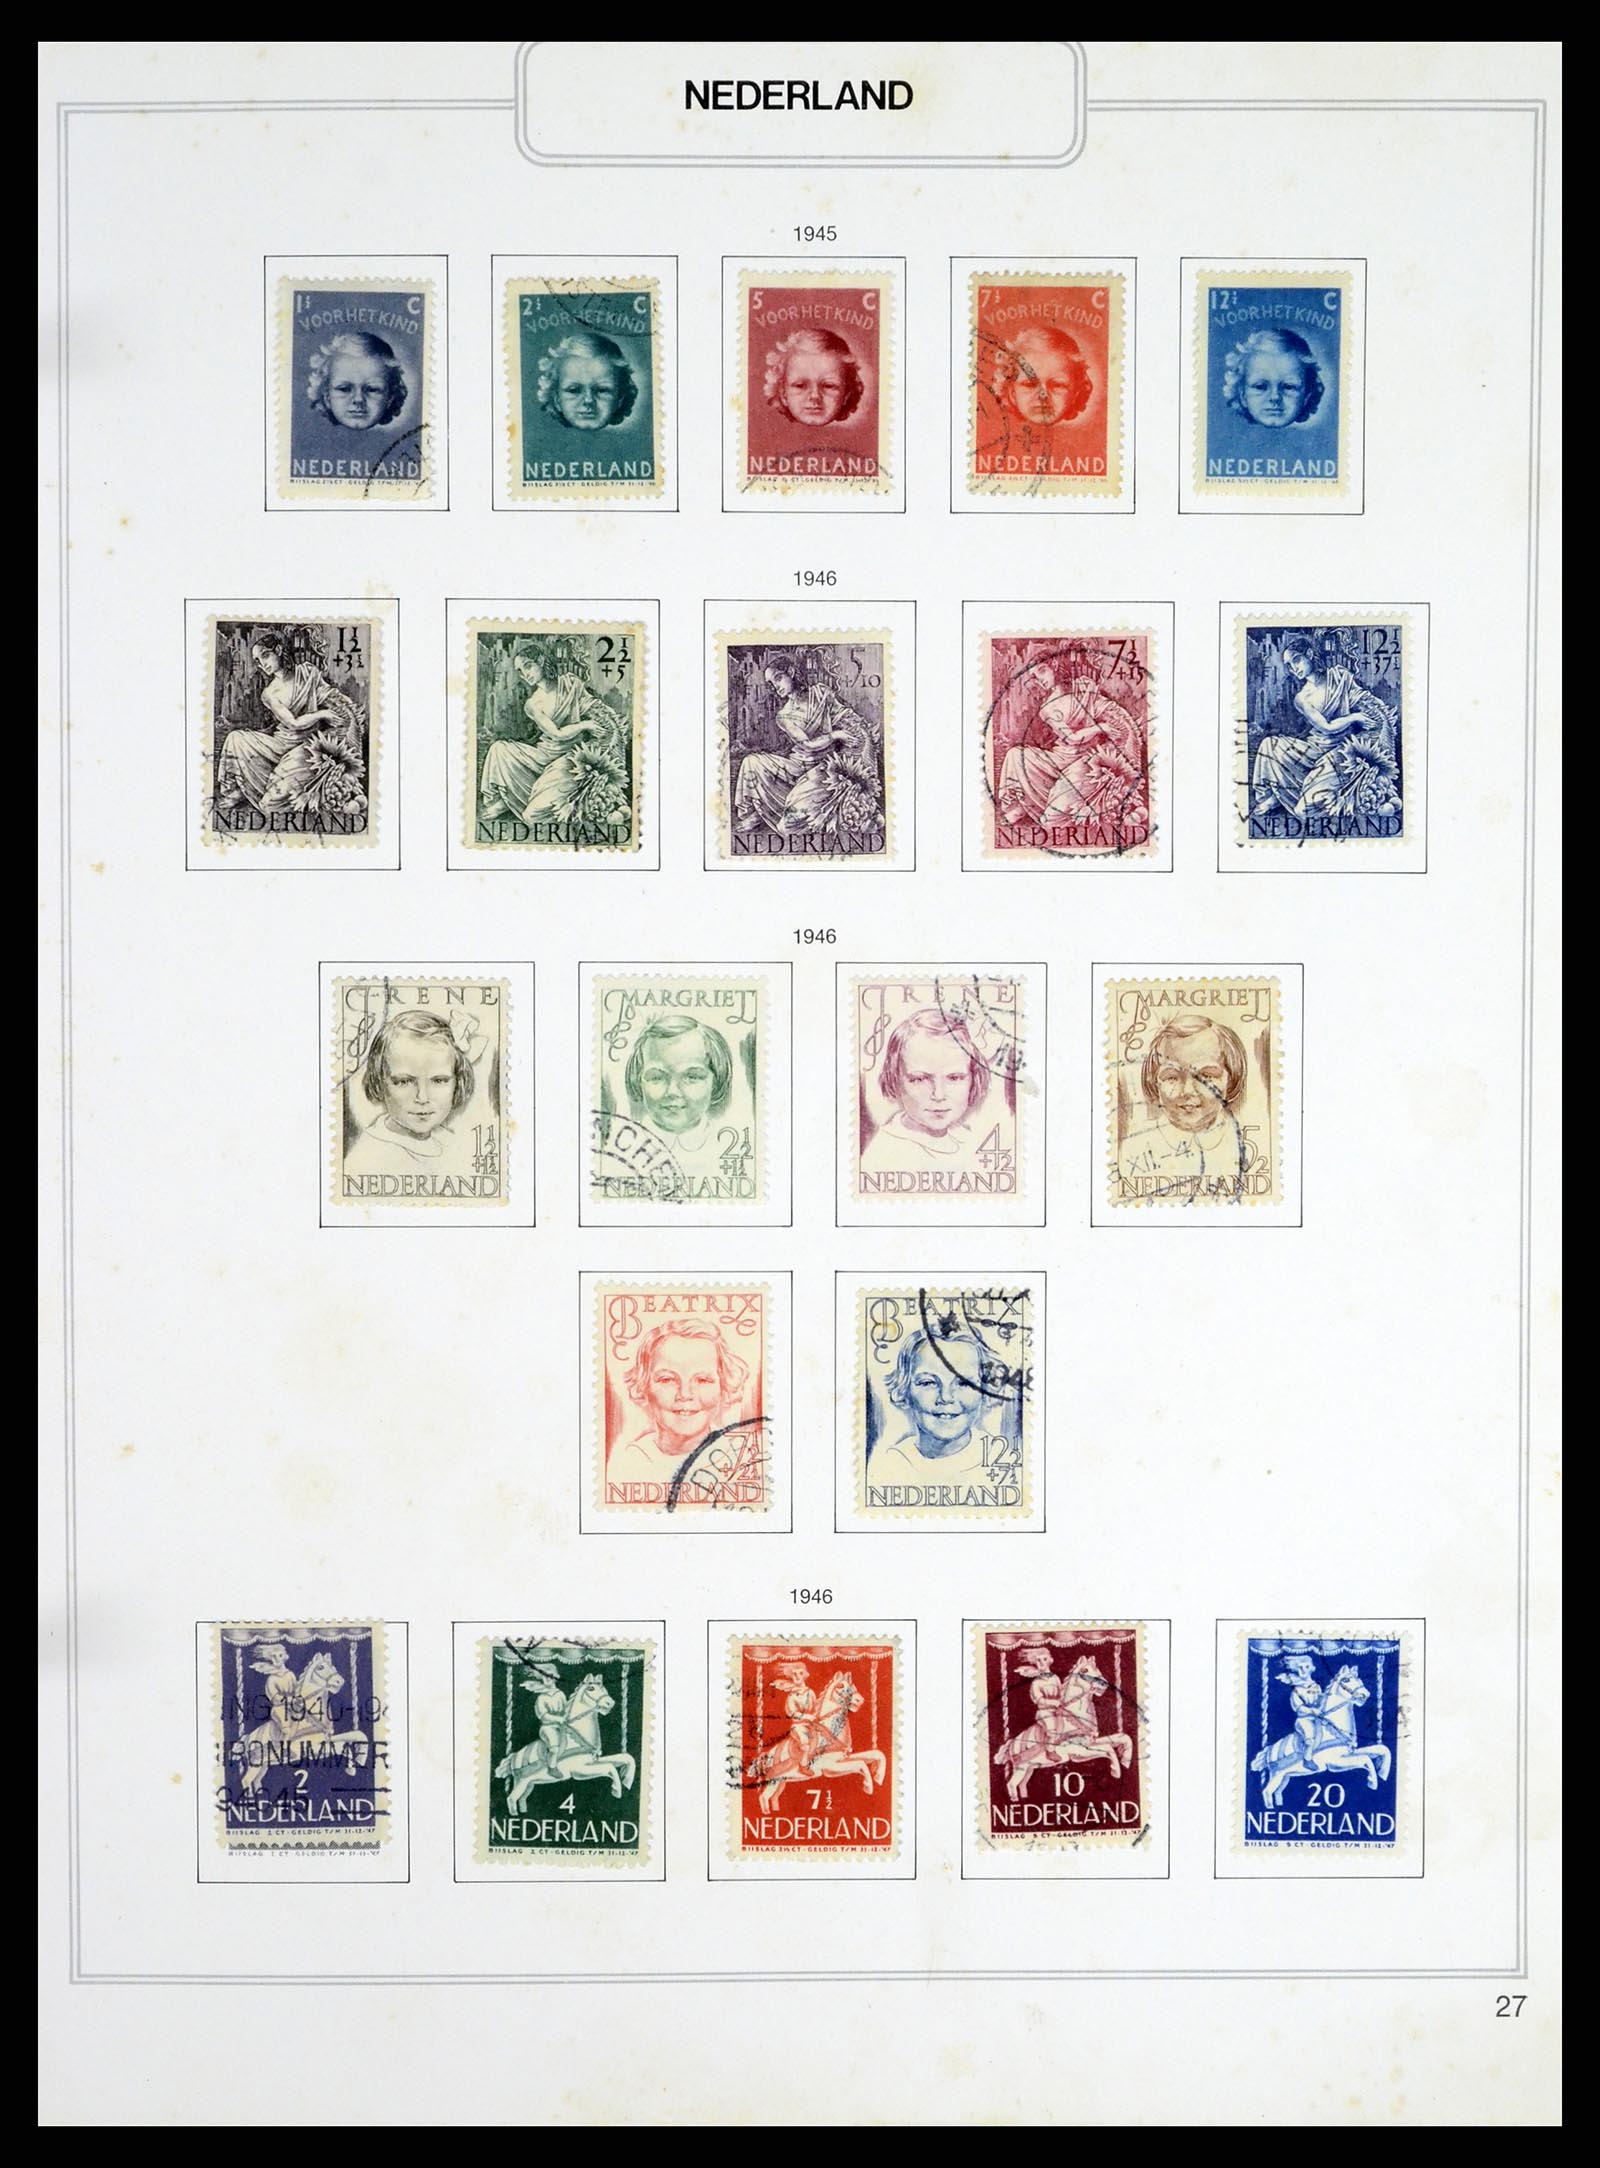 37348 027 - Stamp collection 37348 Netherlands 1852-1995.